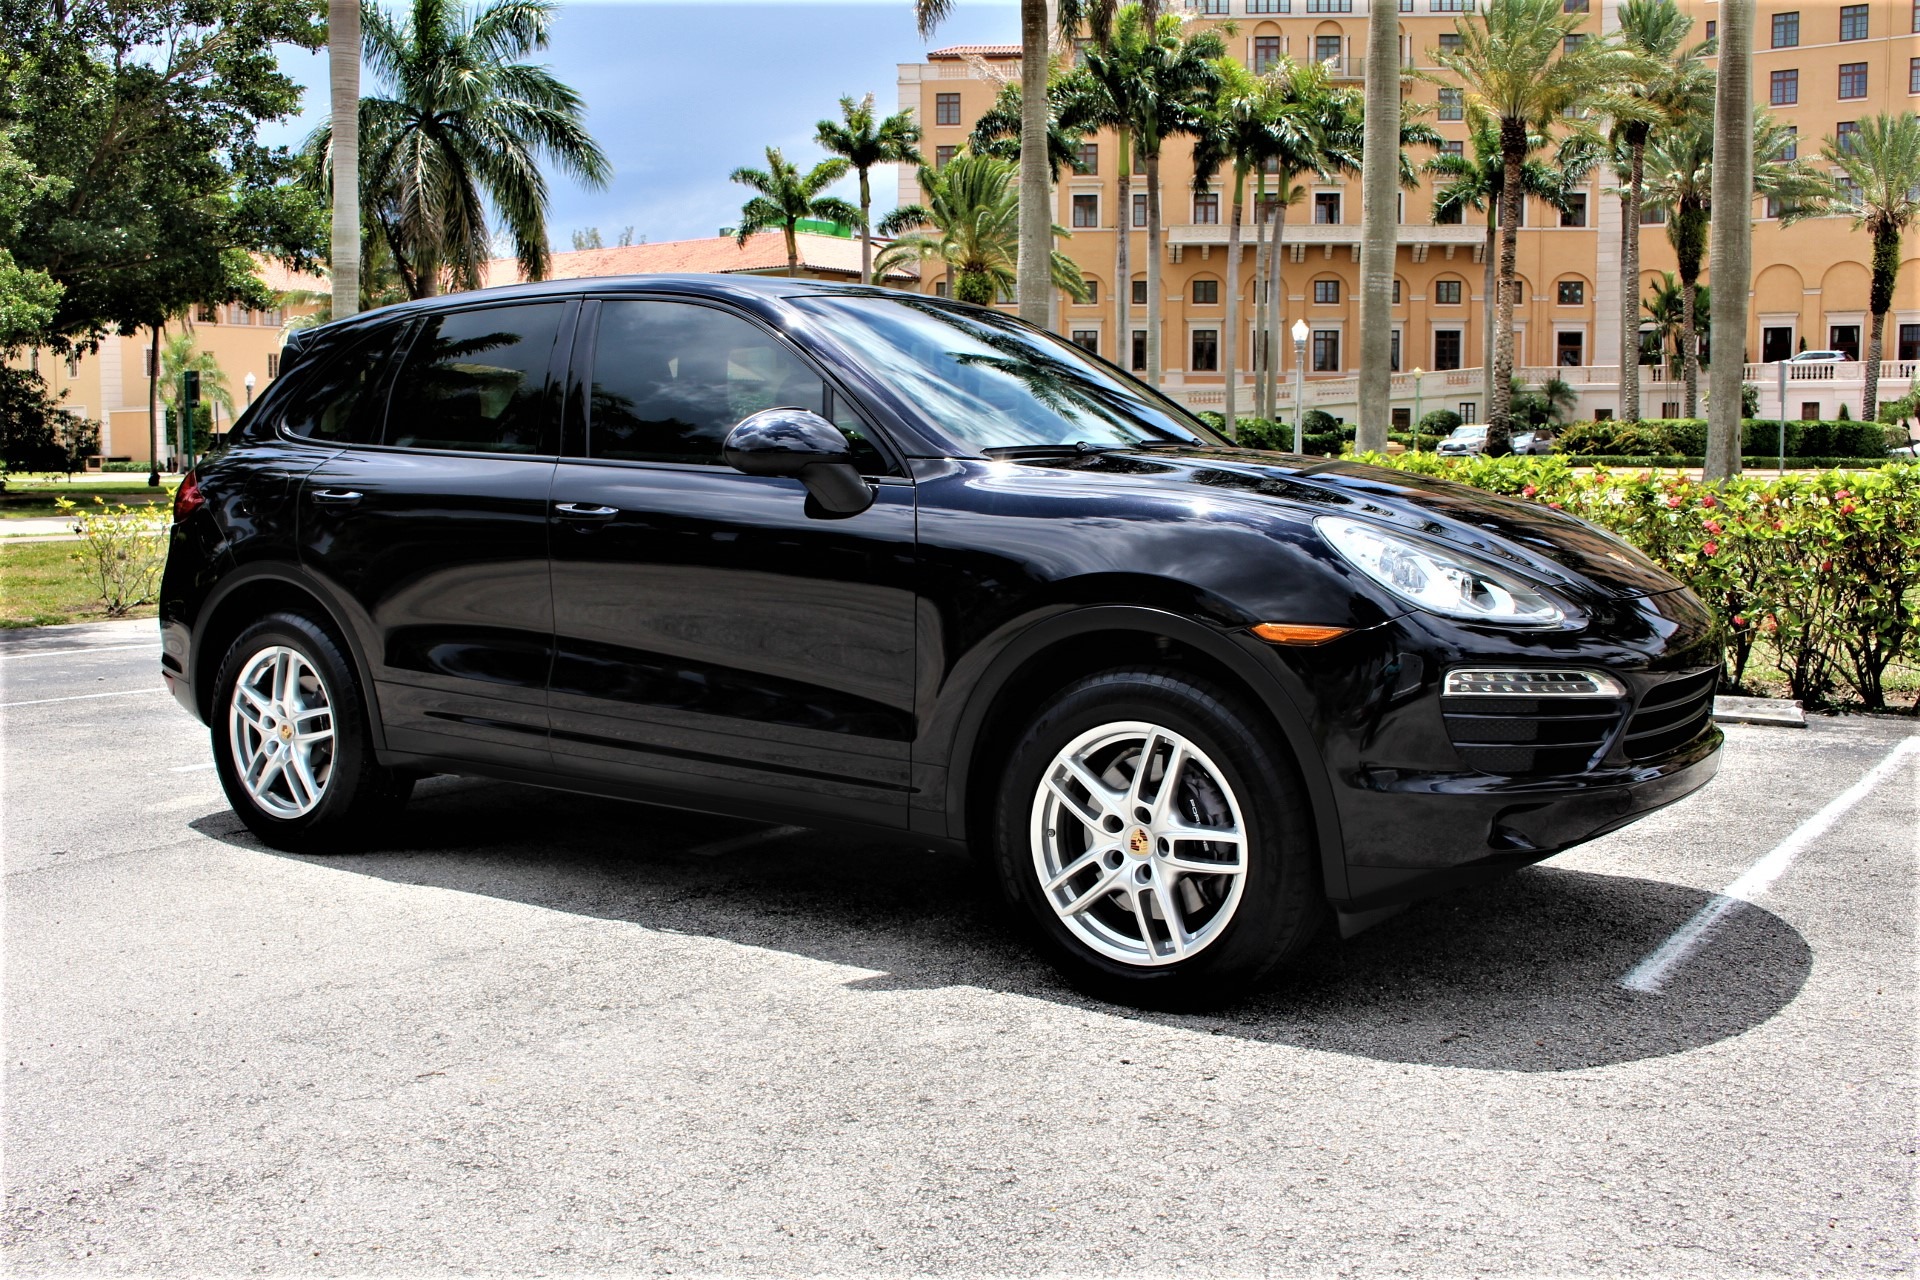 Used 2013 Porsche Cayenne Tiptronic for sale Sold at The Gables Sports Cars in Miami FL 33146 3